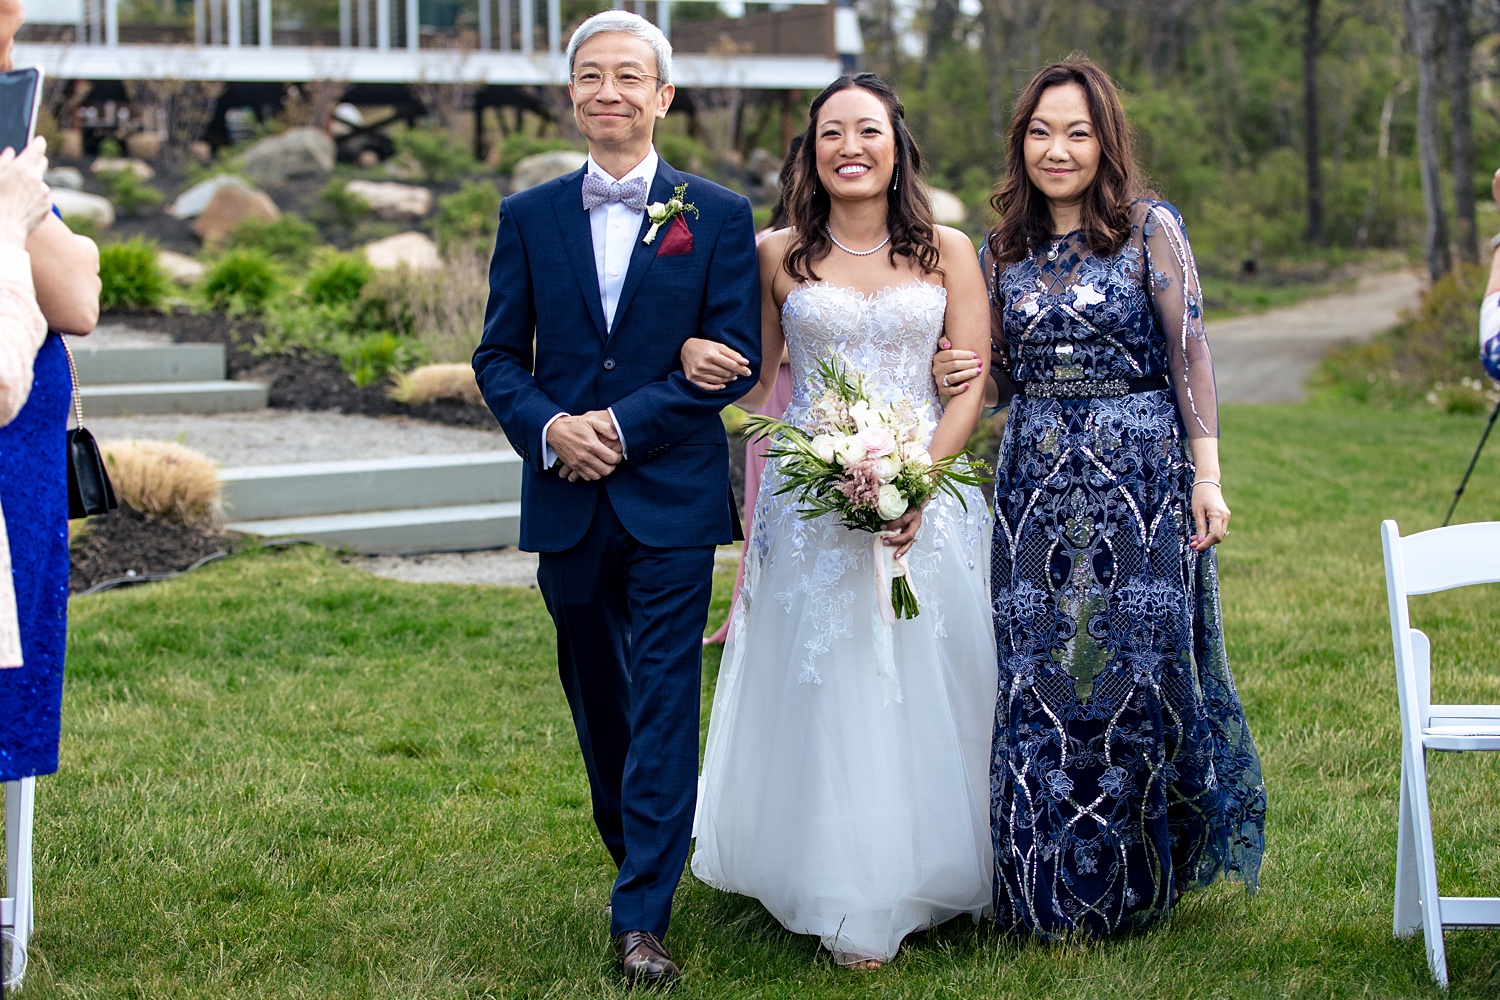 The bride and her parents enter the outdoor wedding ceremony